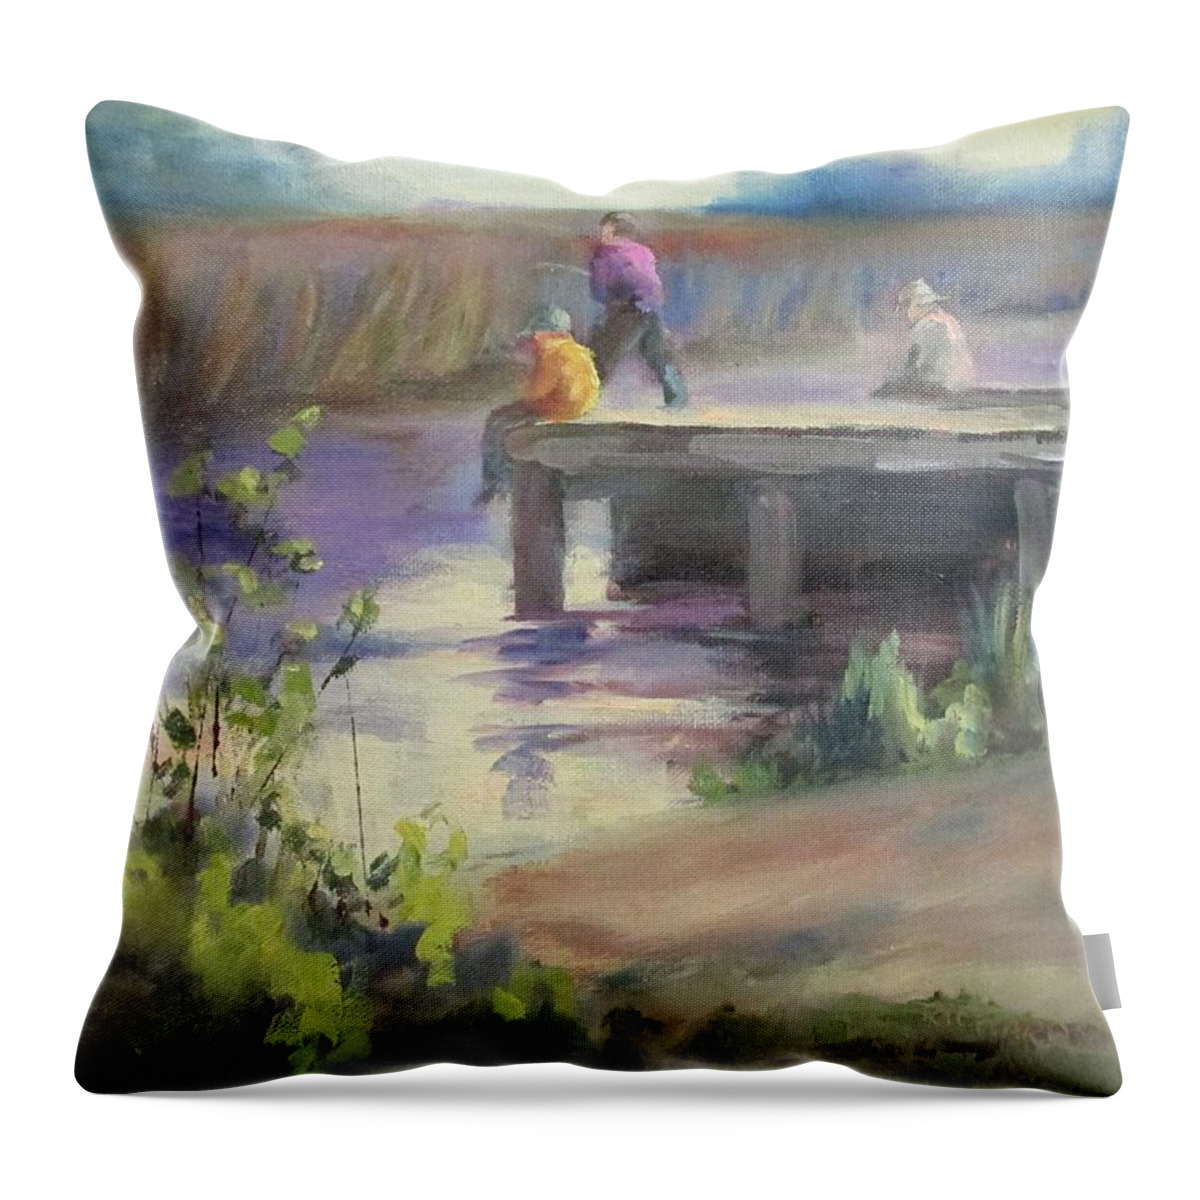 Fishing Throw Pillow featuring the painting Fishing Fools by Susan Richardson